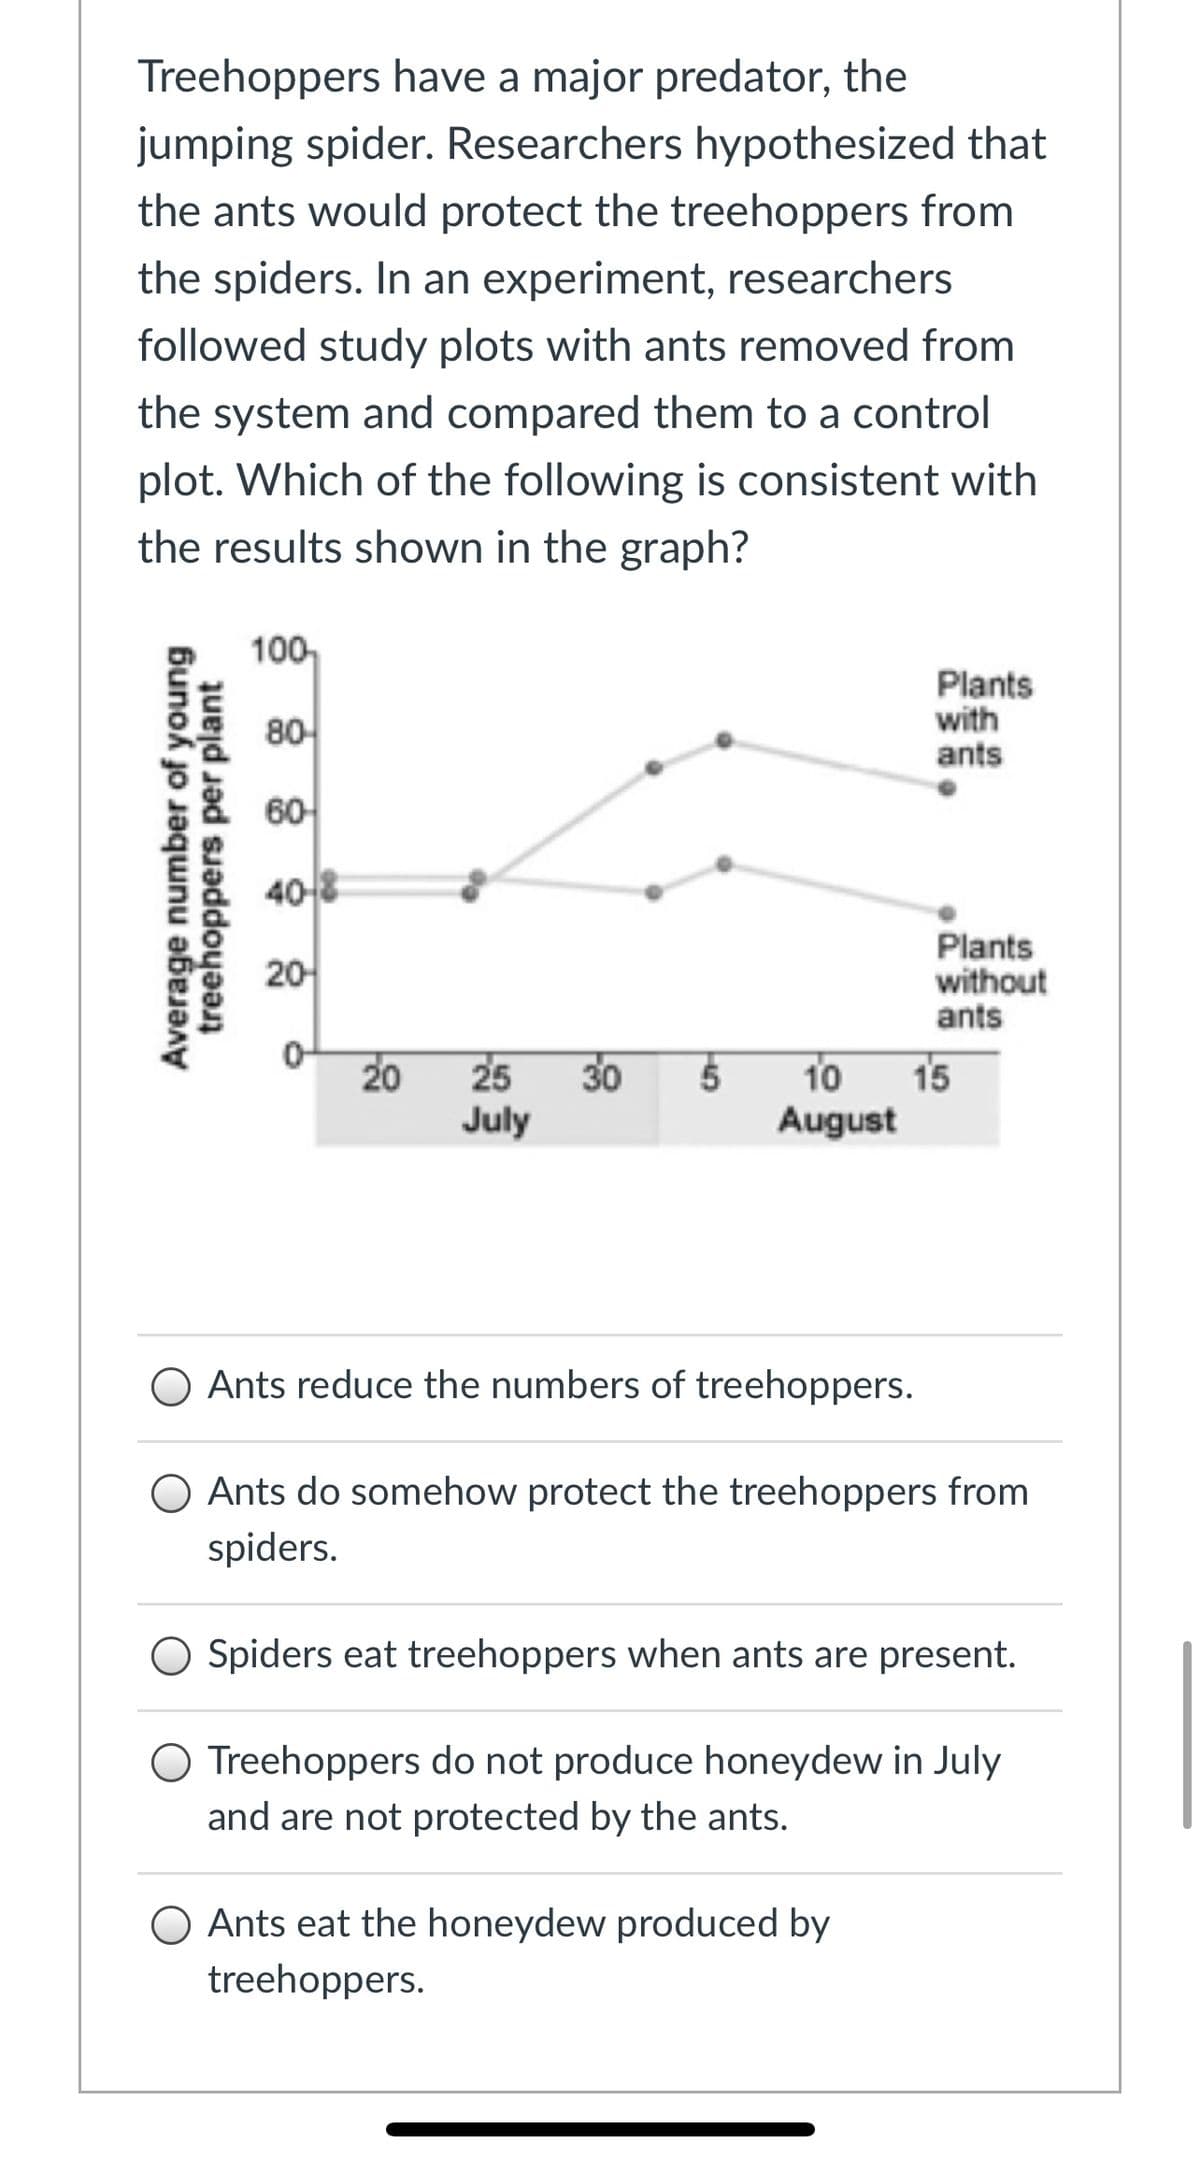 Treehoppers have a major predator, the
jumping spider. Researchers hypothesized that
the ants would protect the treehoppers from
the spiders. In an experiment, researchers
followed study plots with ants removed from
the system and compared them to a control
plot. Which of the following is consistent with
the results shown in the graph?
100,
Plants
with
ants
80-
60
408
Plants
without
ants
20
20
25
30
10
15
July
August
O Ants reduce the numbers of treehoppers.
O Ants do somehow protect the treehoppers from
spiders.
O Spiders eat treehoppers when ants are present.
O Treehoppers do not produce honeydew in July
and are not protected by the ants.
O Ants eat the honeydew produced by
treehoppers.
Average number of young
treehoppers per plant
